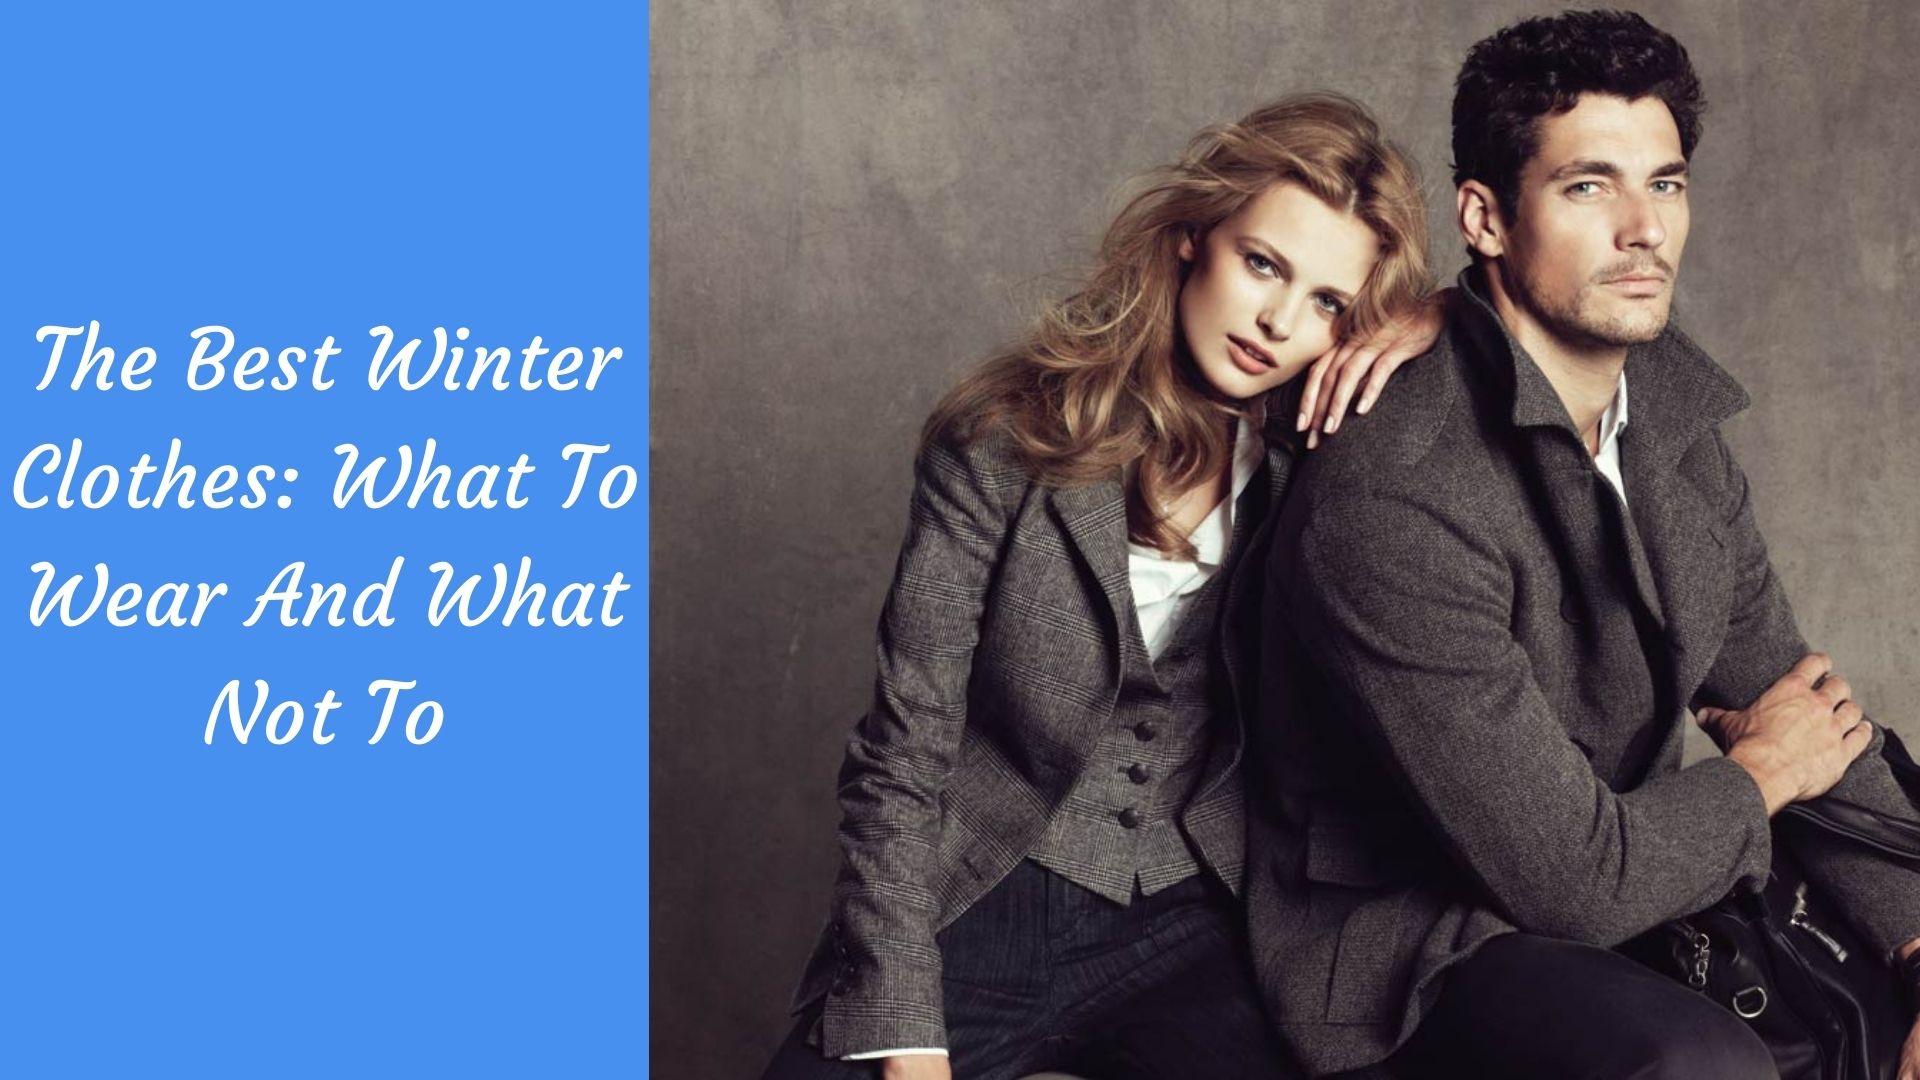 The Best Winter Clothes: What To Wear And What Not To